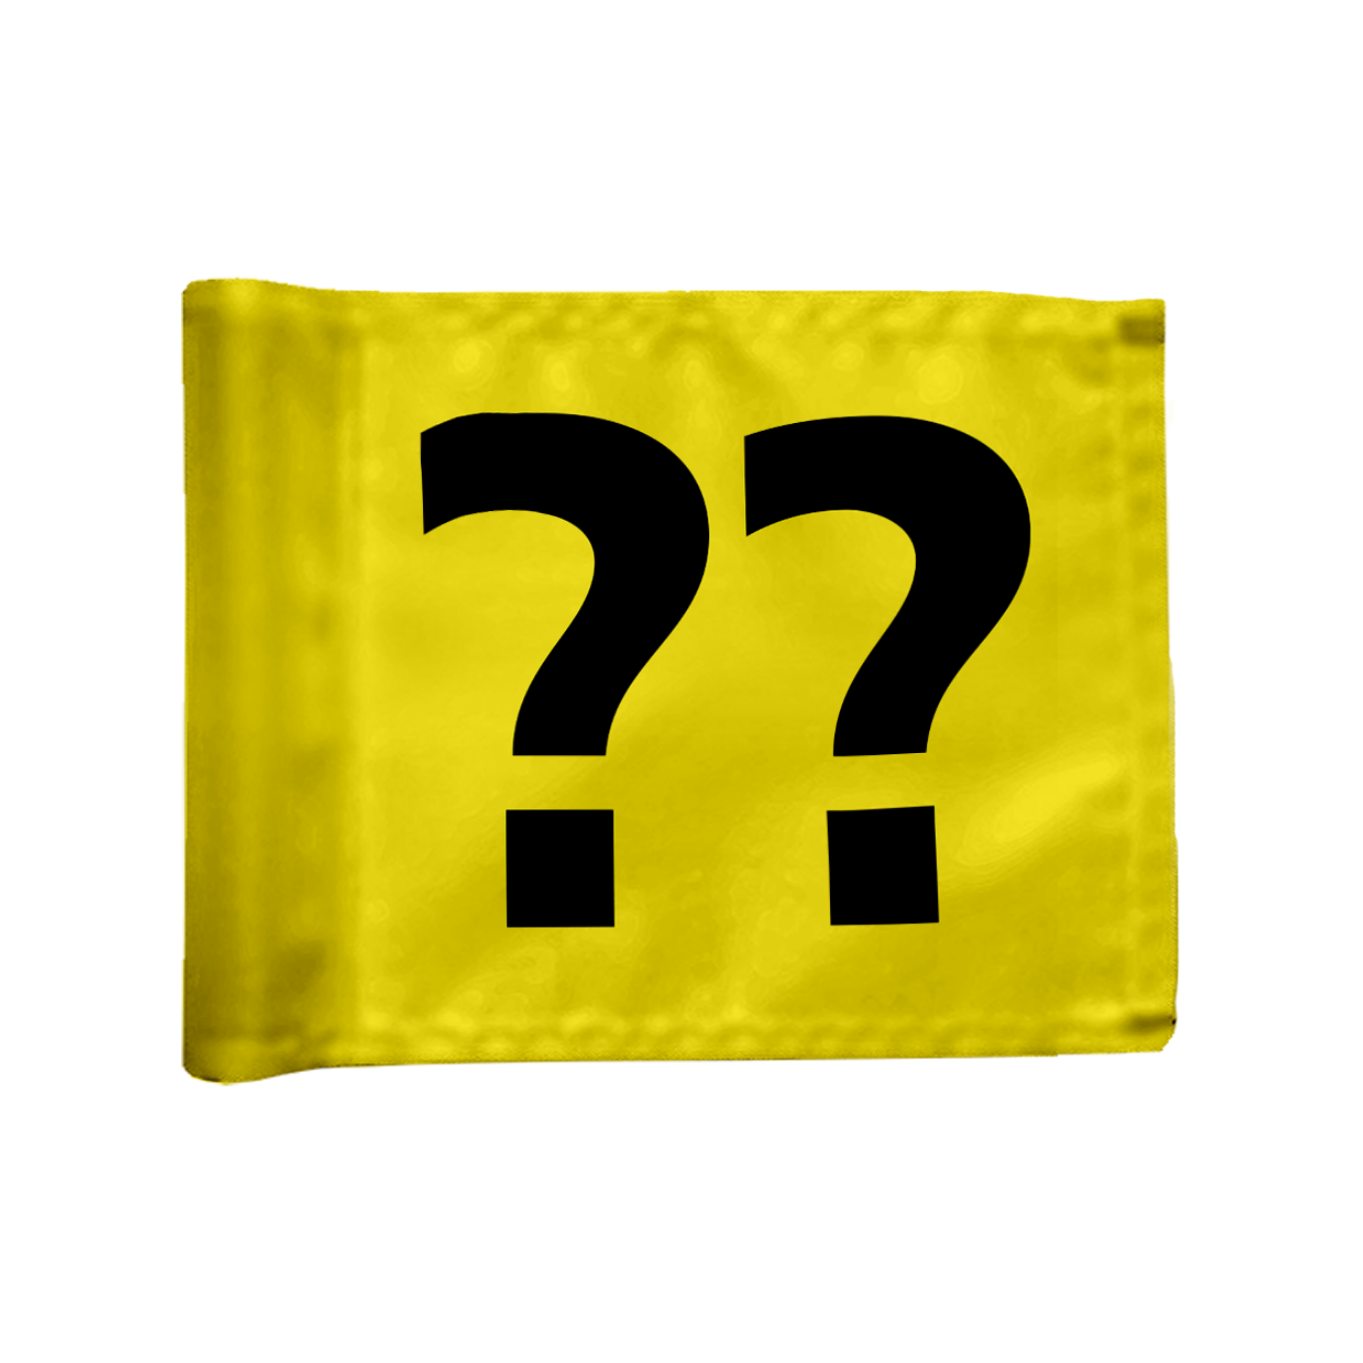 Single golf flag, yellow with optional hole number, braced, 200 gram fabric.